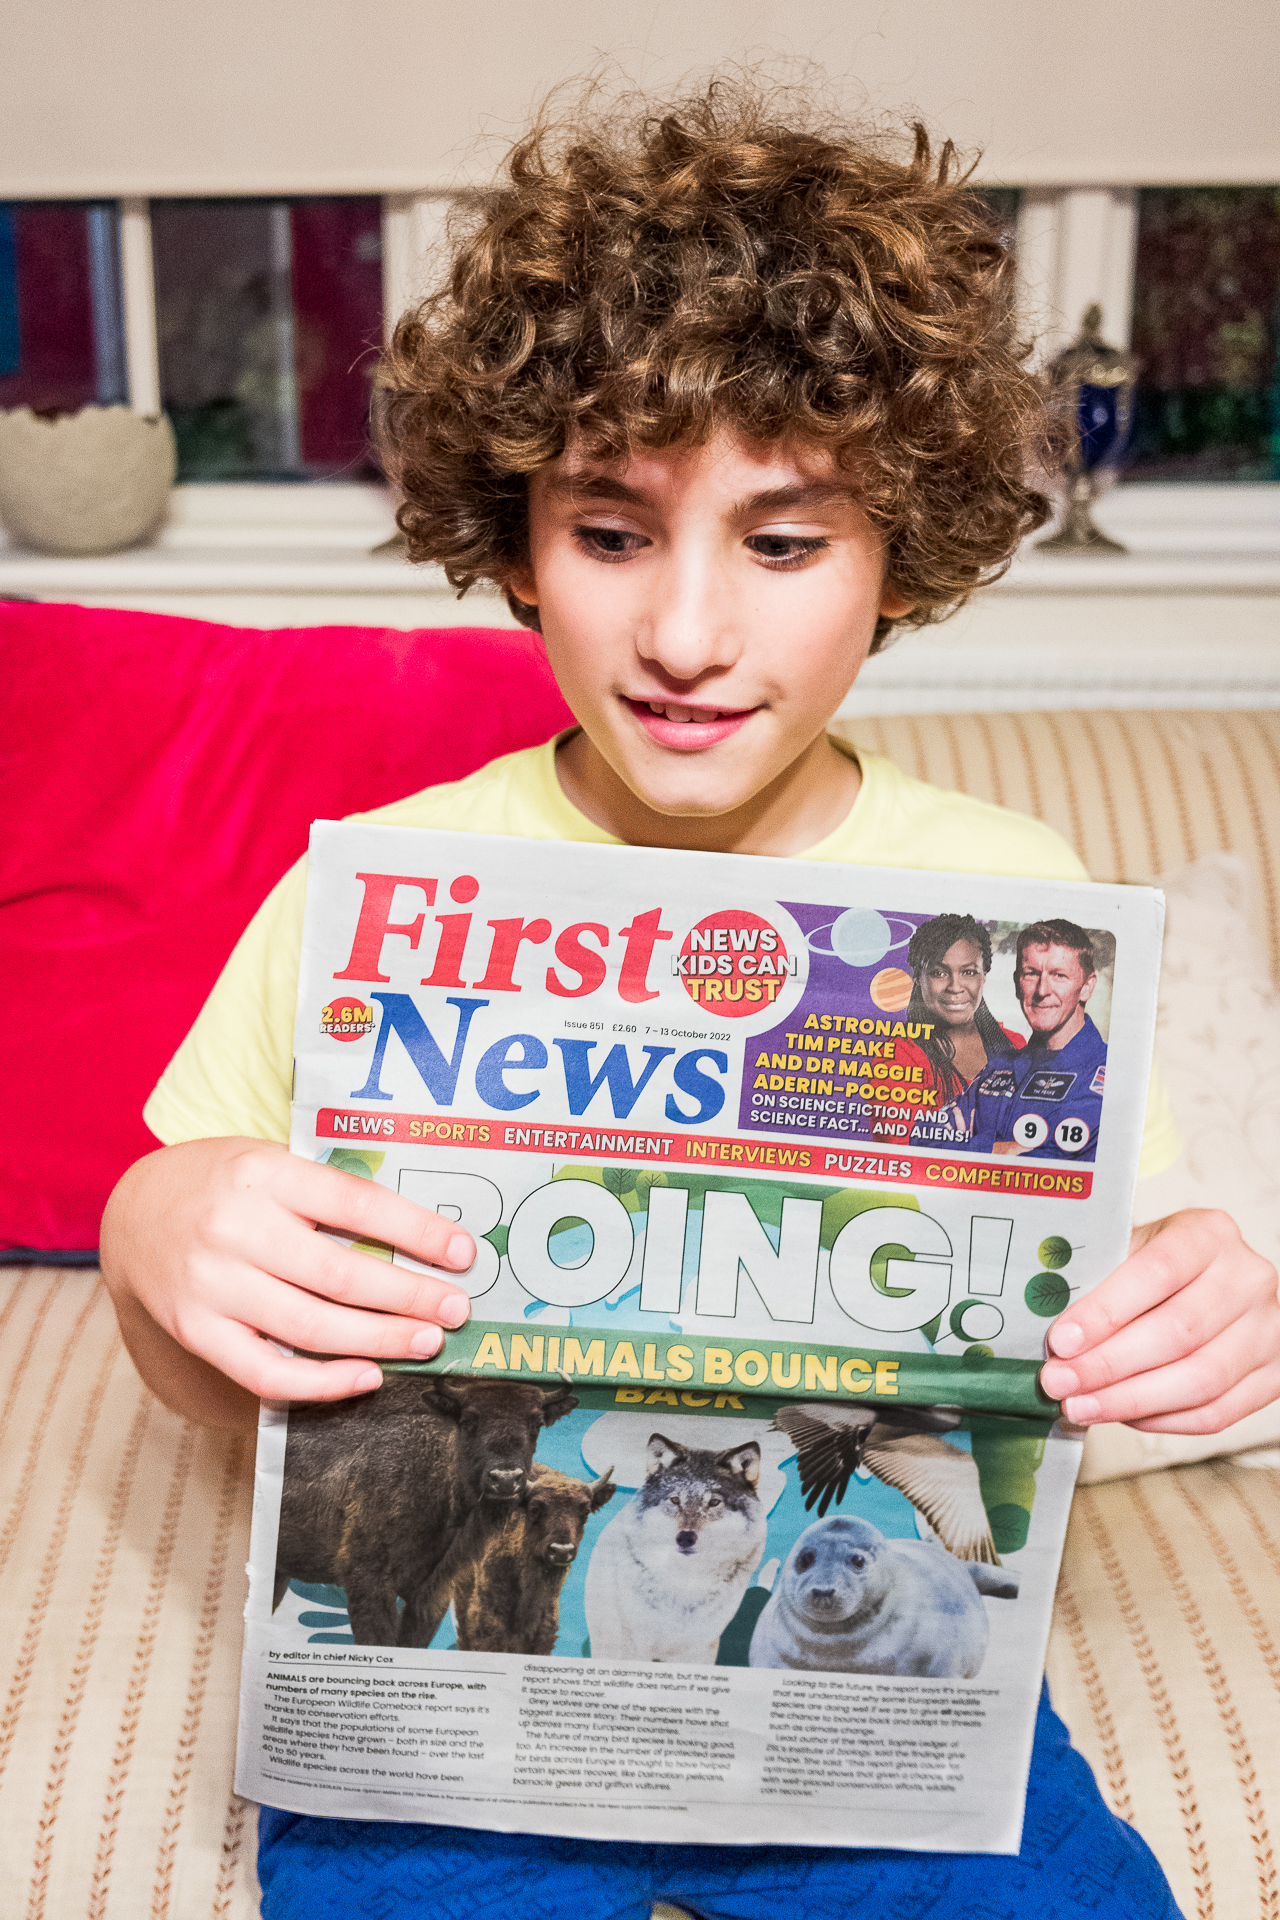 childen's newspaper and app First News